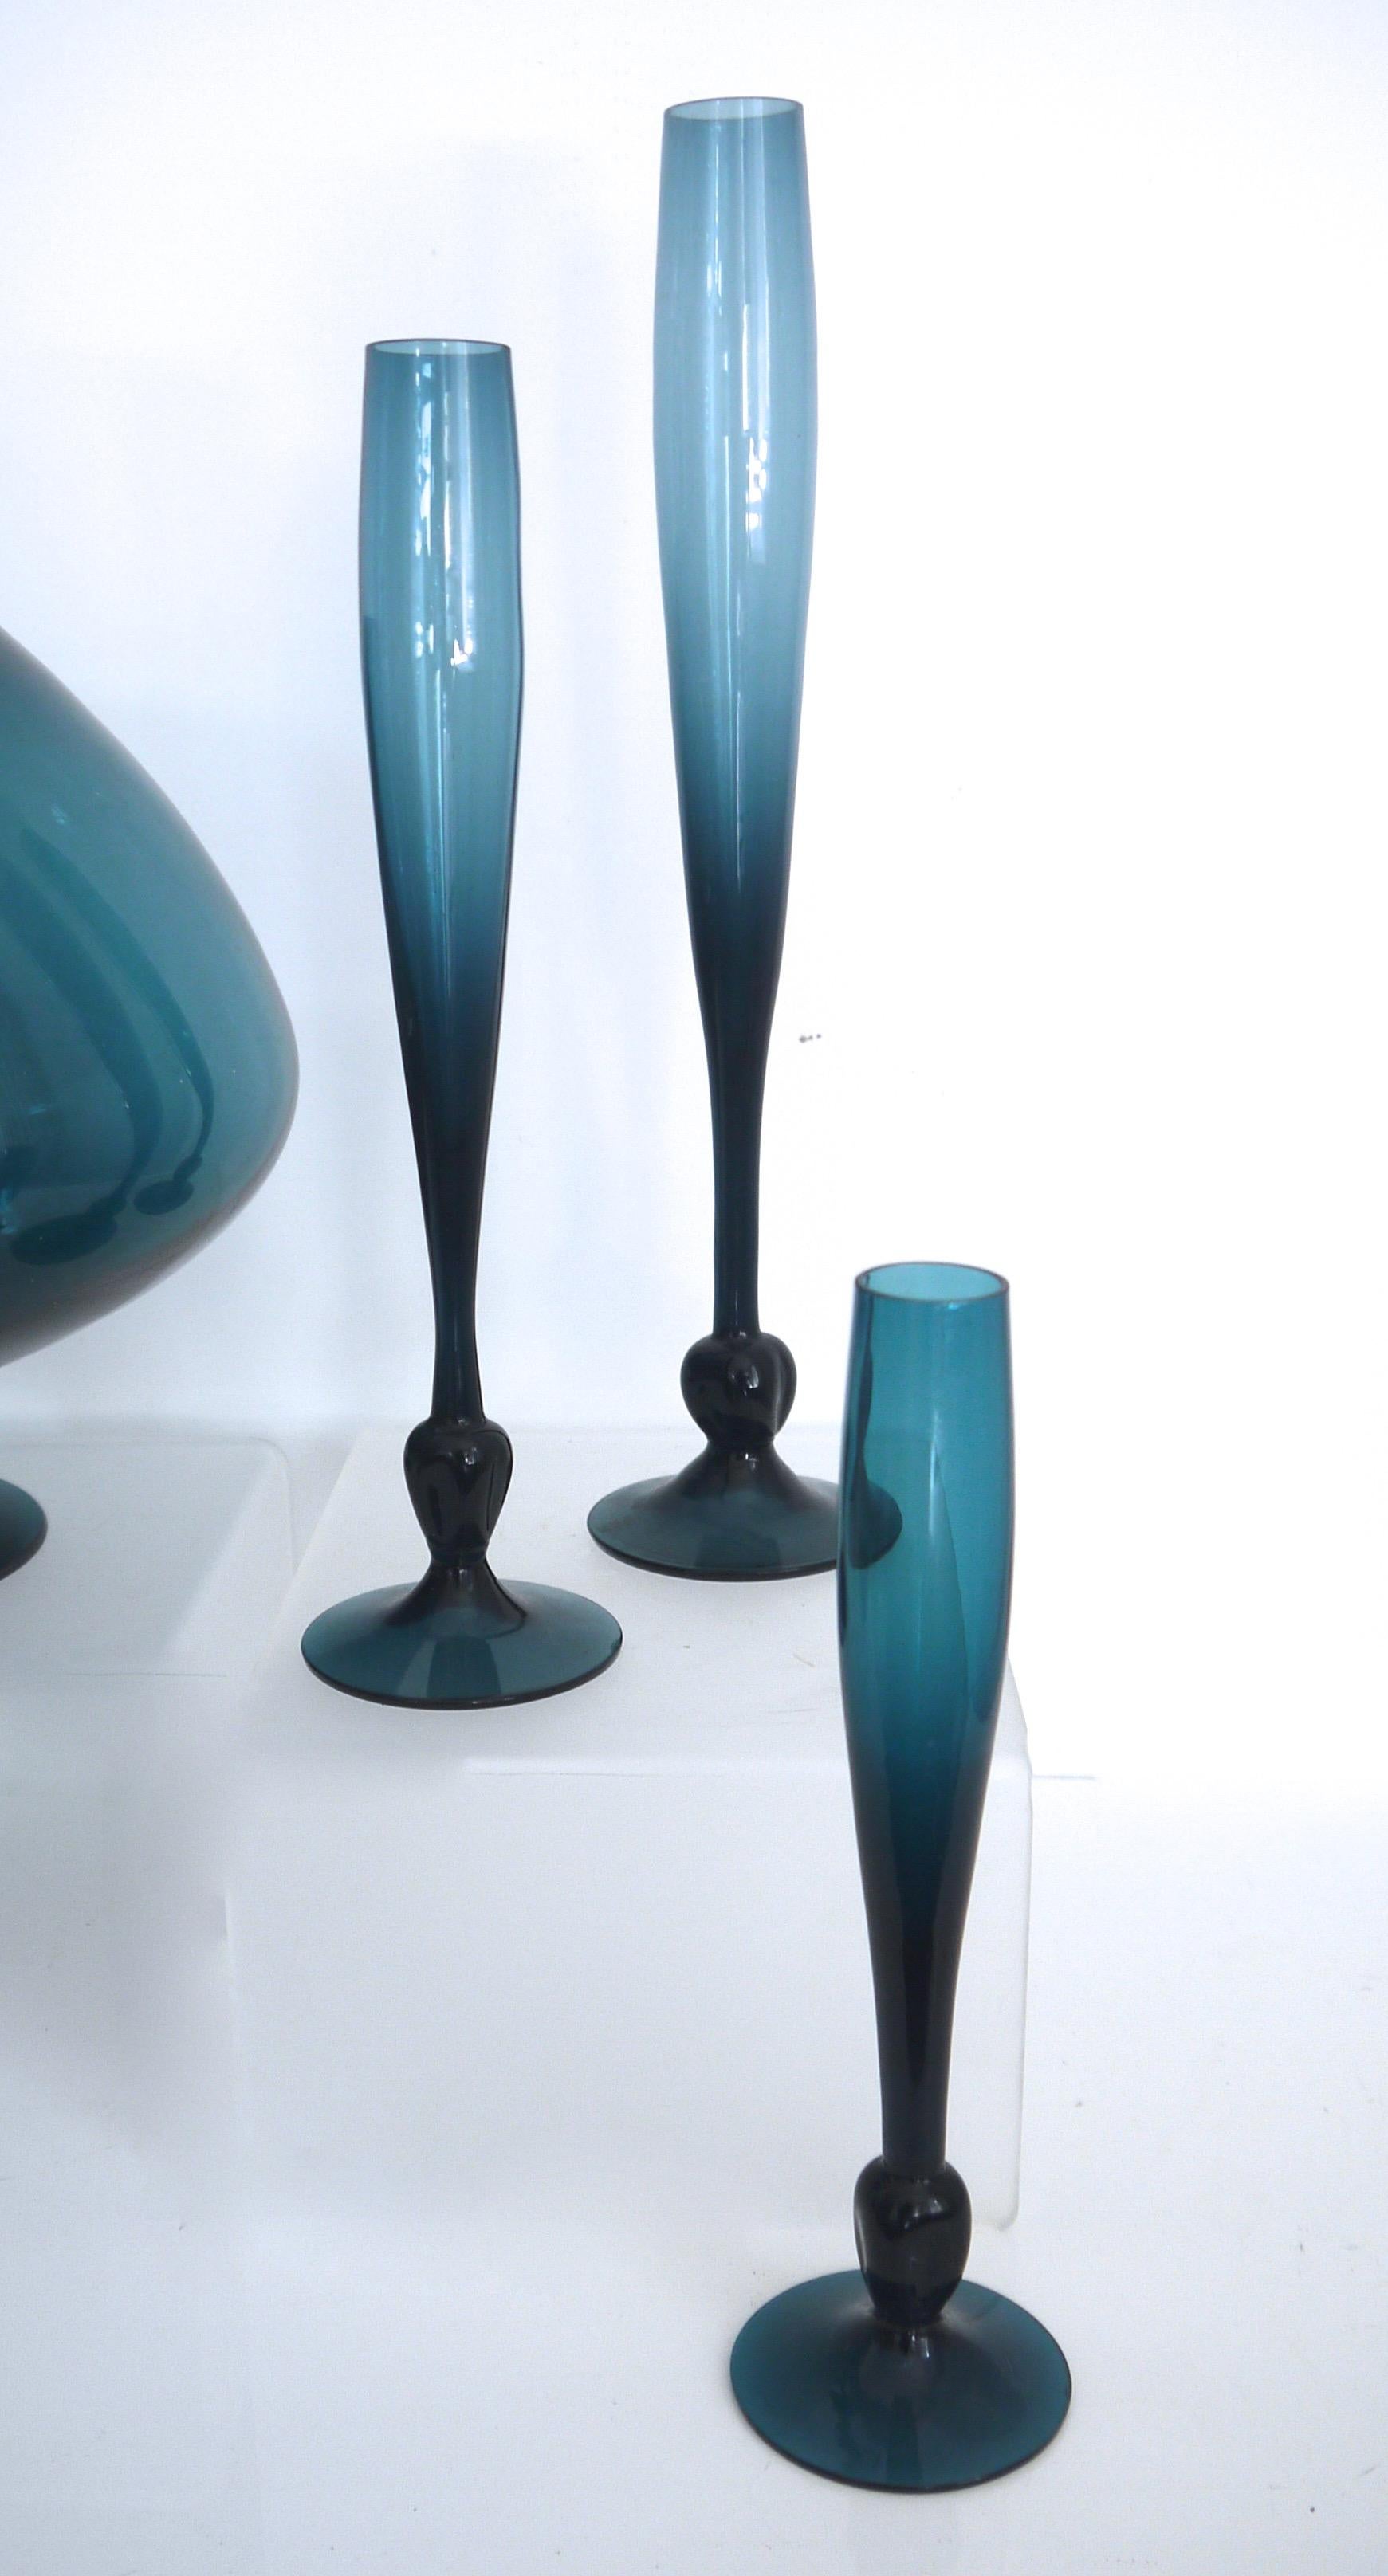 Vintage Lindshammer vases designed by Gunnar Anderson early 1960s Three ‘bud vases’ from Whitefriars

 Whitefriars Ref: 9835 30cms/24cms/18cms in height.

The ‘brandy/ballon’ design is rare at this size. The other is a Classic Scandinavian